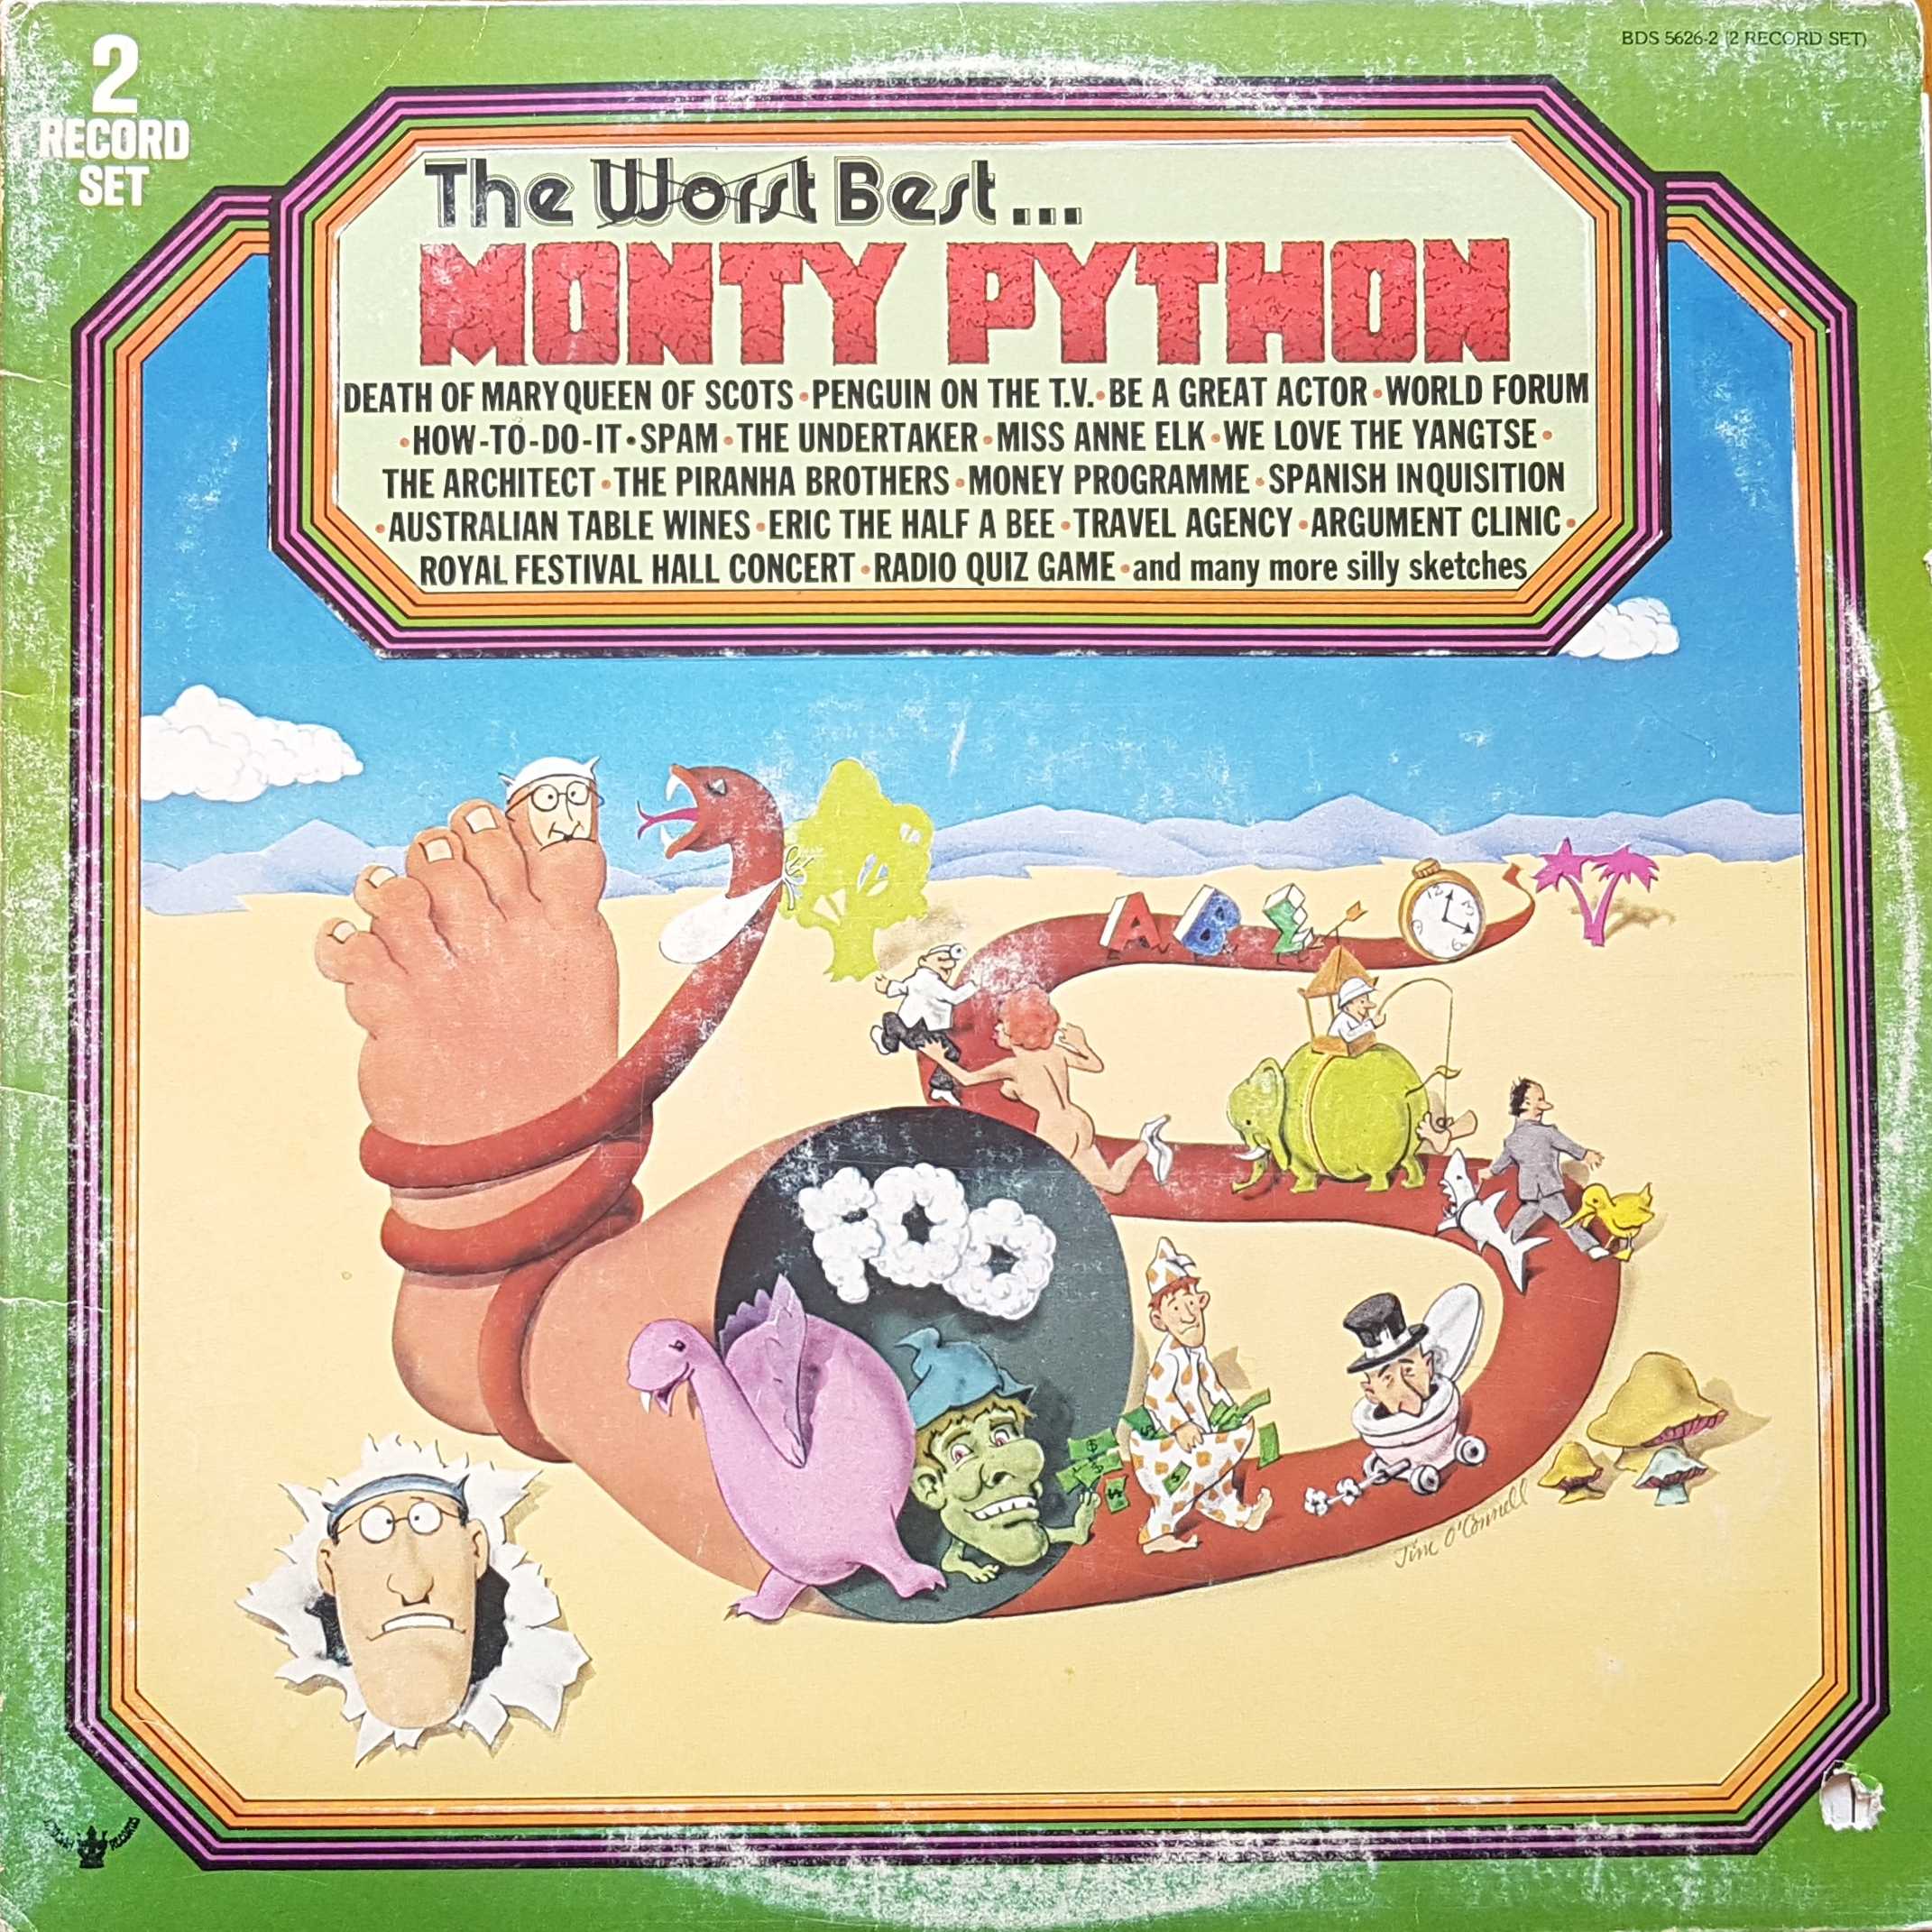 Picture of BDS 5656-2 The (worst) best of Monty Python by artist Monty Python from the BBC records and Tapes library